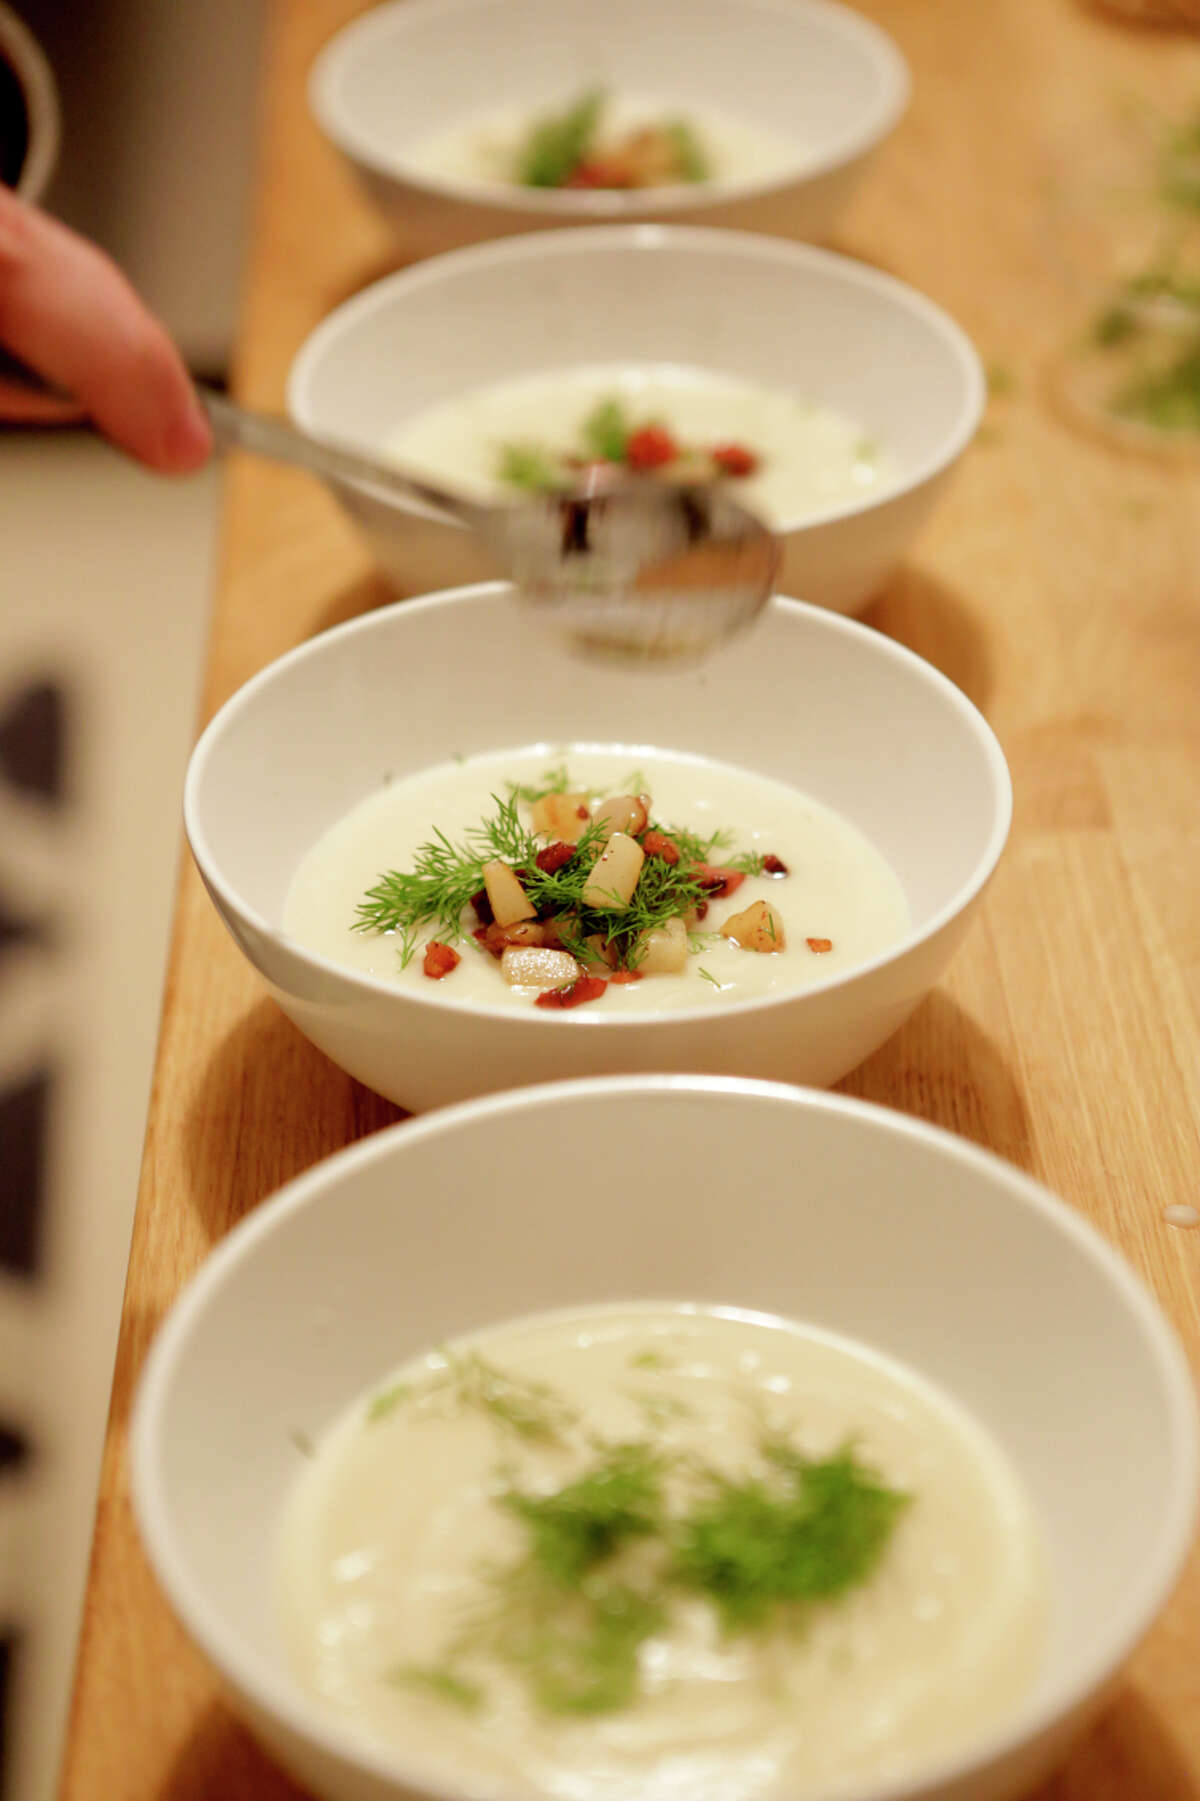 The soup is garnished with pears, bacon and dill before serving.